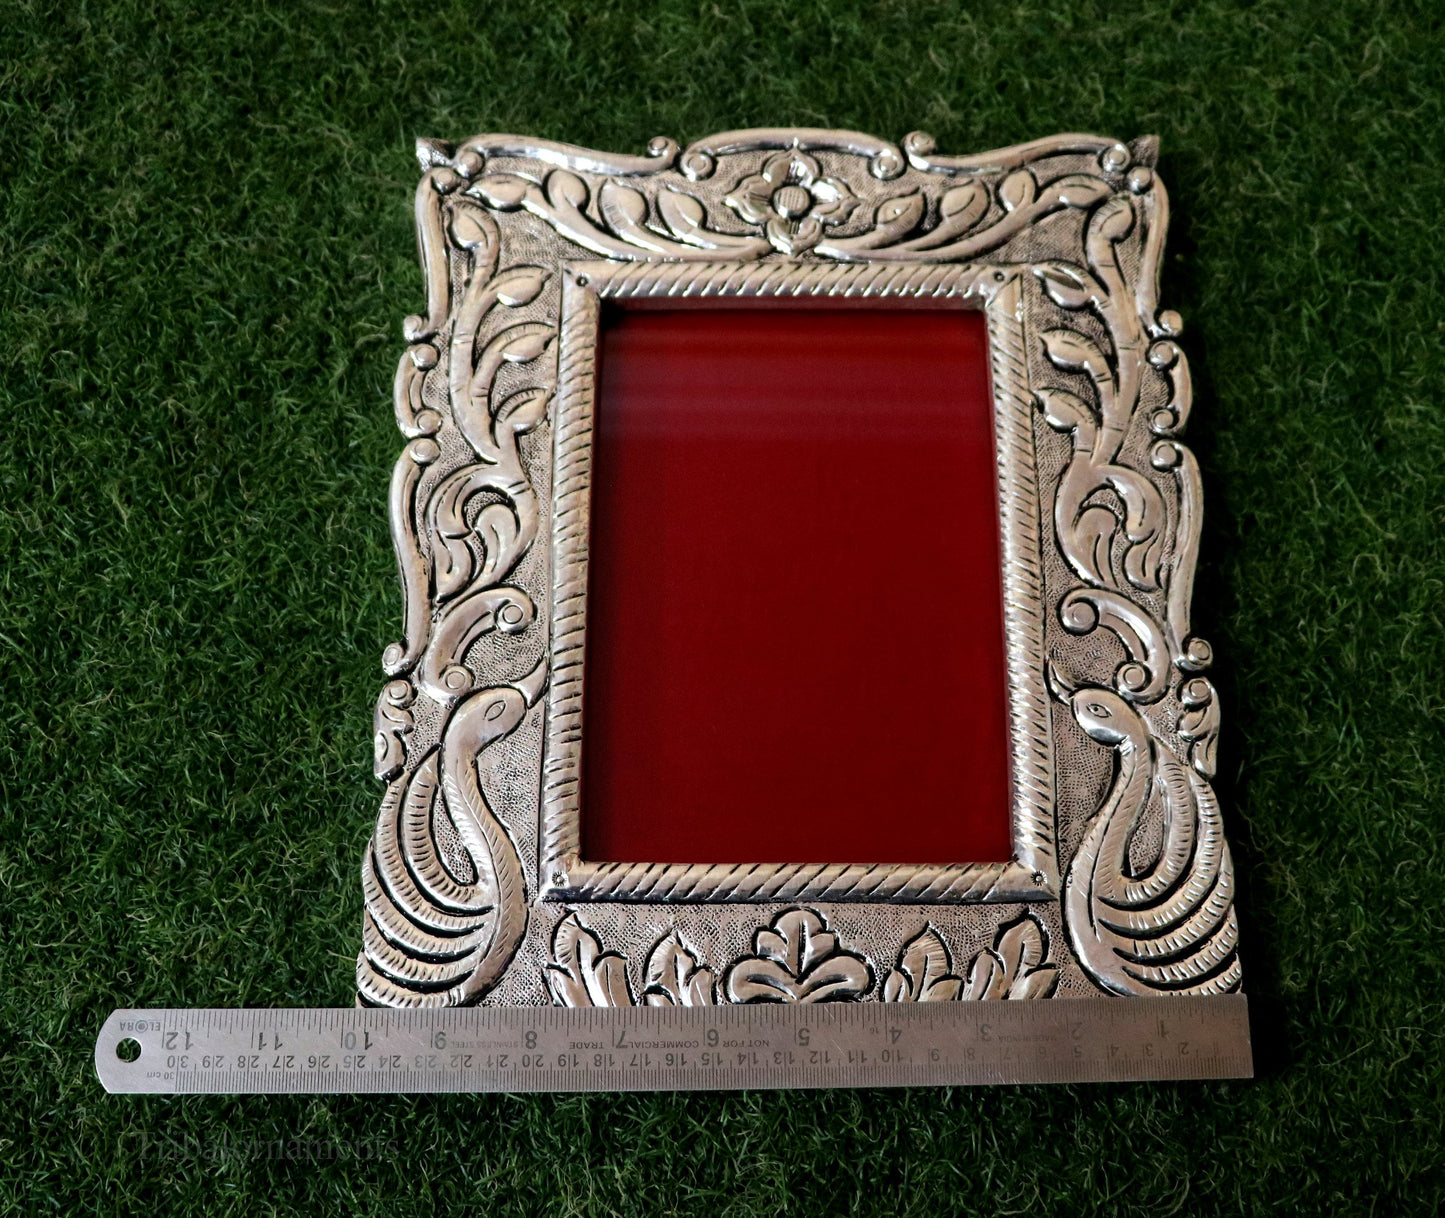 12.5" x 7" inches 999 fine silver handmade photo frame, amazing vintage royal style wooden base wall hanging frame, best corporate gift sf01 - TRIBAL ORNAMENTS